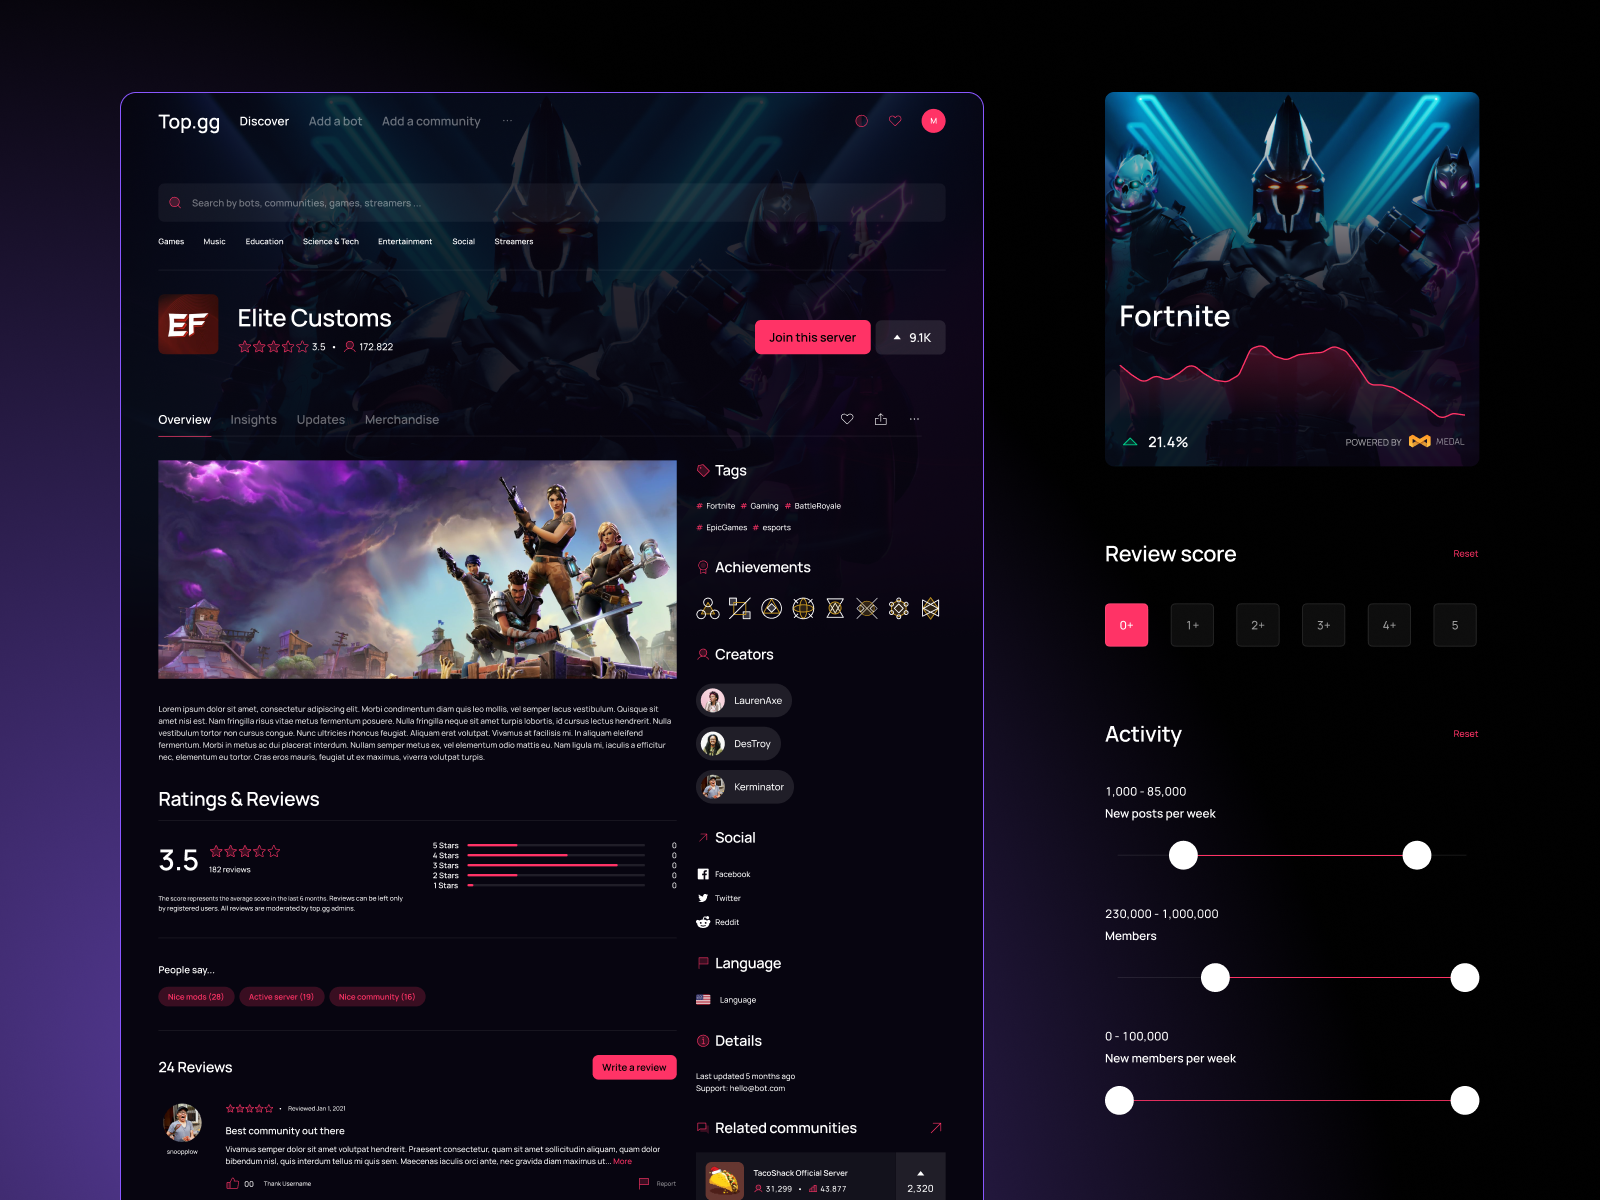 Top.gg - Community page by Rubens Cantuni on Dribbble